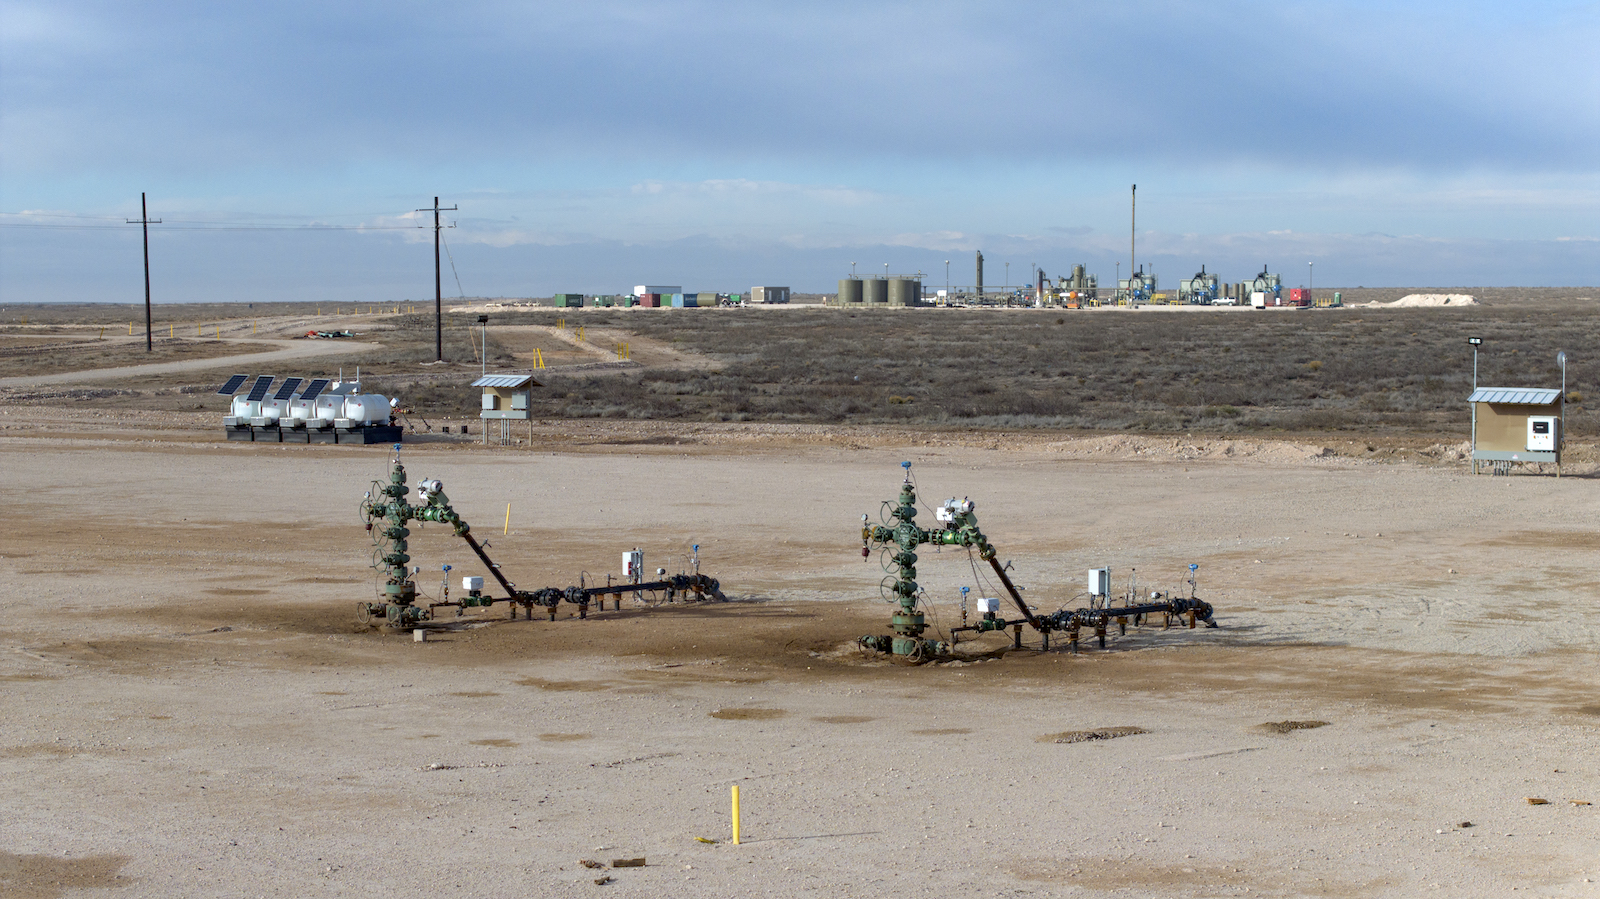 fracking pipes coming out of a dirt plot